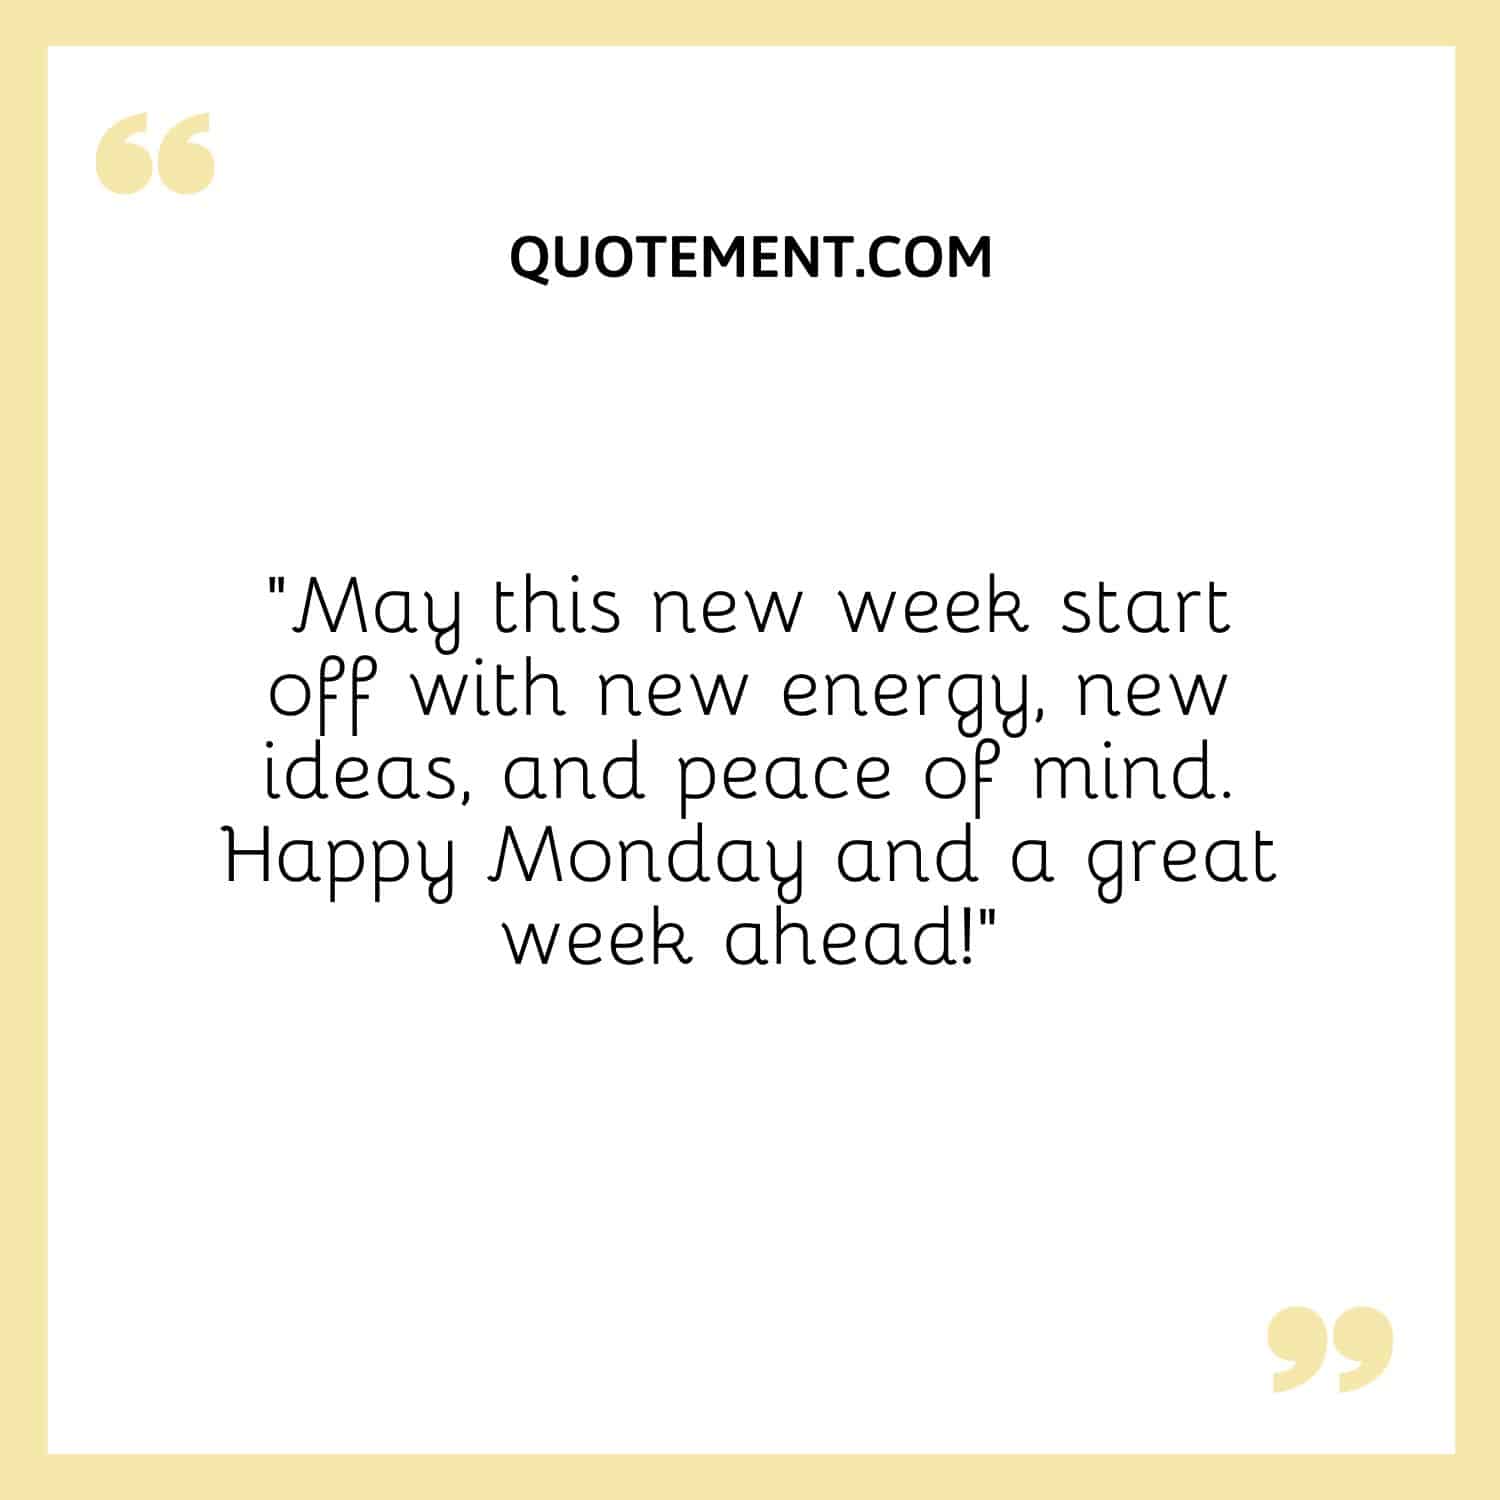 May this new week start off with new energy